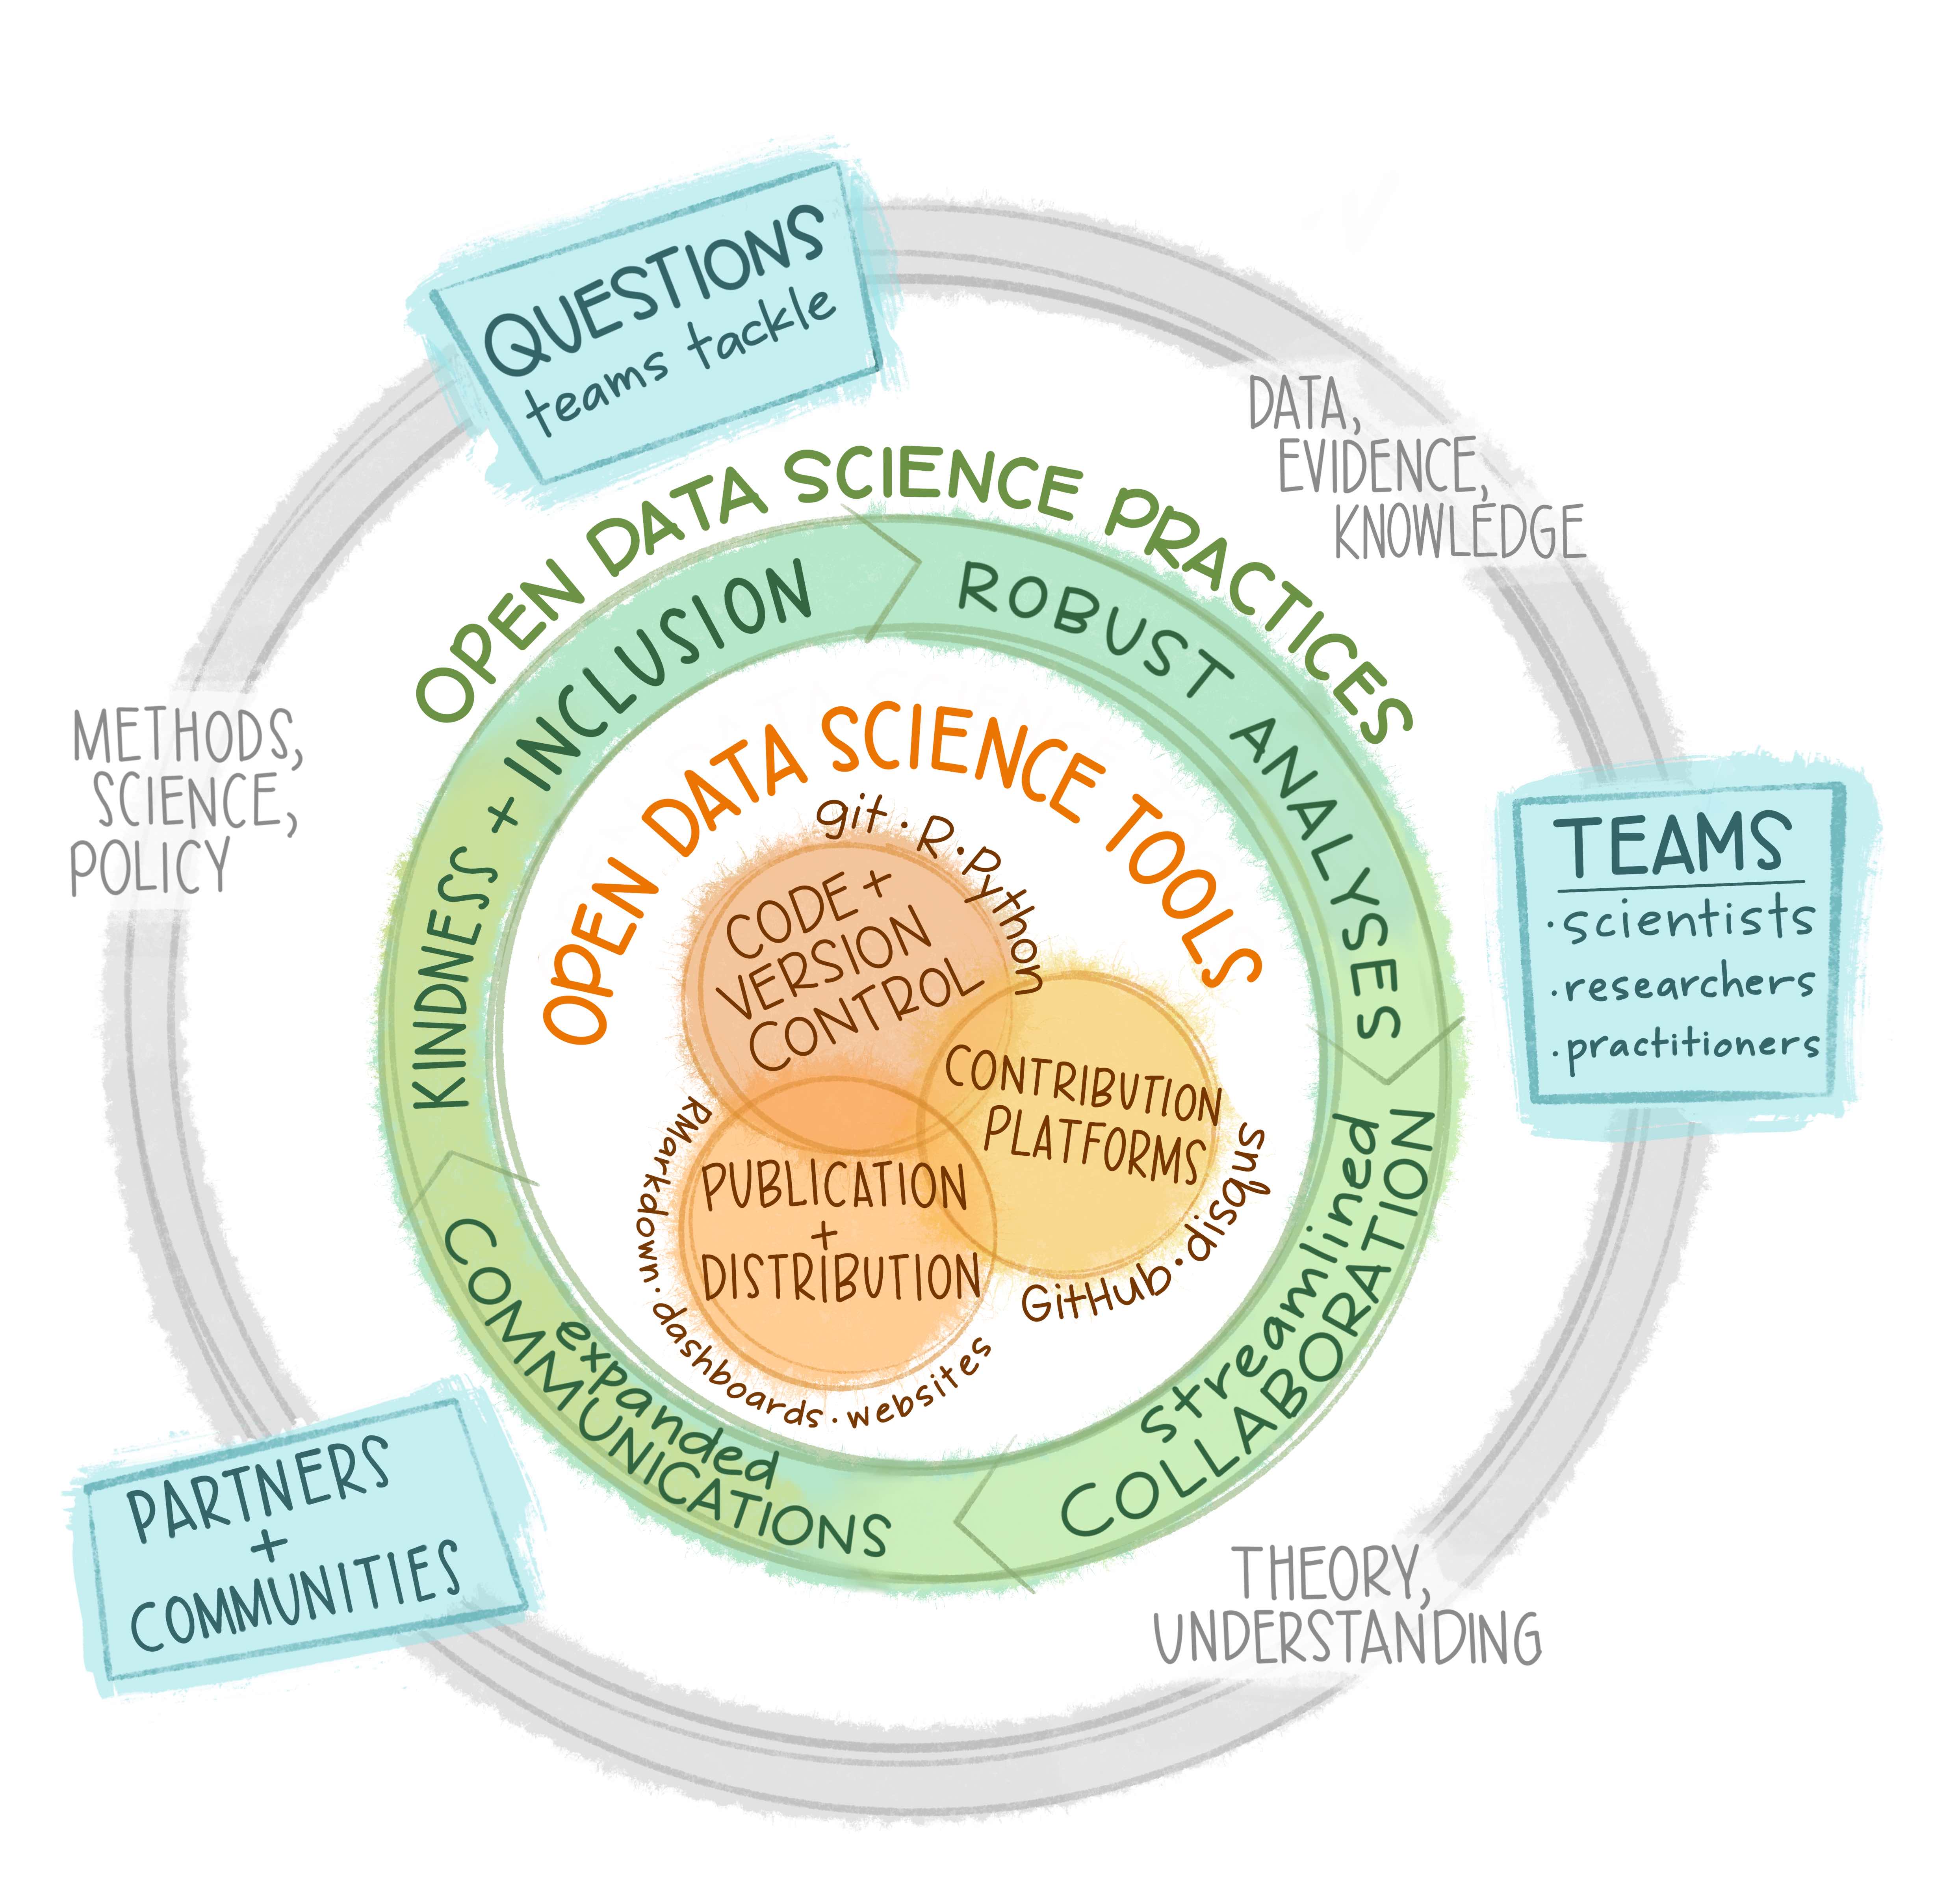 The Openscapes theory of change illustrated as concentric circles. The outer gray circle represents approaches. The phrases, 'Data, Evidence, Knowledge', 'Theory, Understanding', and 'Methods, Science, Policy' are written aatop this gray circle. Blue  boxes sit atop the gray circle as well. They say, 'QUESTIONS teams tackle', 'TEAMS: scientists, researchers, practitioners', 'PARTNERS + COMMUNITIES'. A green circle representing Open Data Science Practices sits within the gray outer cricle. The following words are writtedn atop the green circle: 'Kindess + Inclusion', 'Robust Analyses', 'Streamlined Collaboration', 'Expanded Communications'. At the center of this diagram is a Ven Diagram of three overlapping orange circles representing Open Data Science Tools. Once circle represents 'Code + Version Control' (tools such as git, R, Python), 'Contribution Platforms' (tools such as GitHub, disqus), and 'Publication + Distribution' (tools such as R Markdown, dashboards, websites).